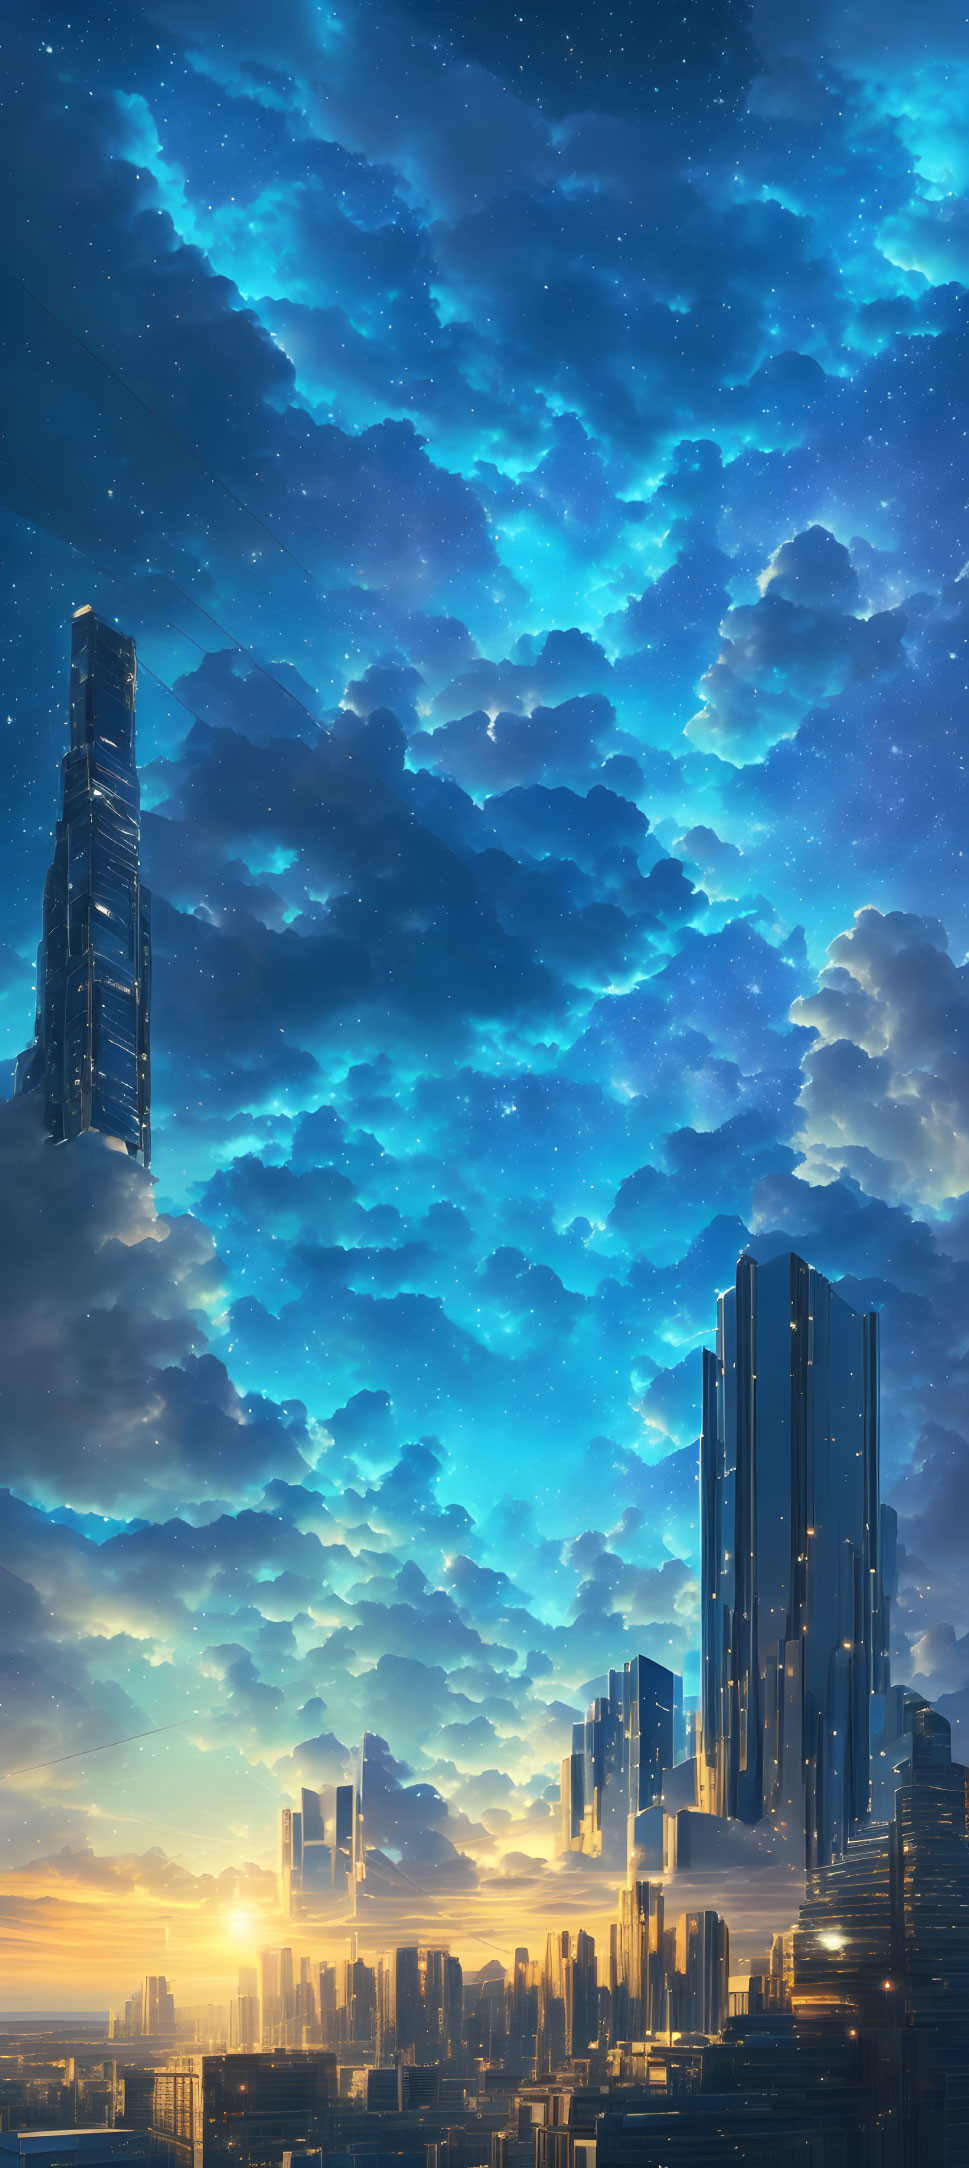 Starry Heights: Skyscrapers under a Deep Blue Sky